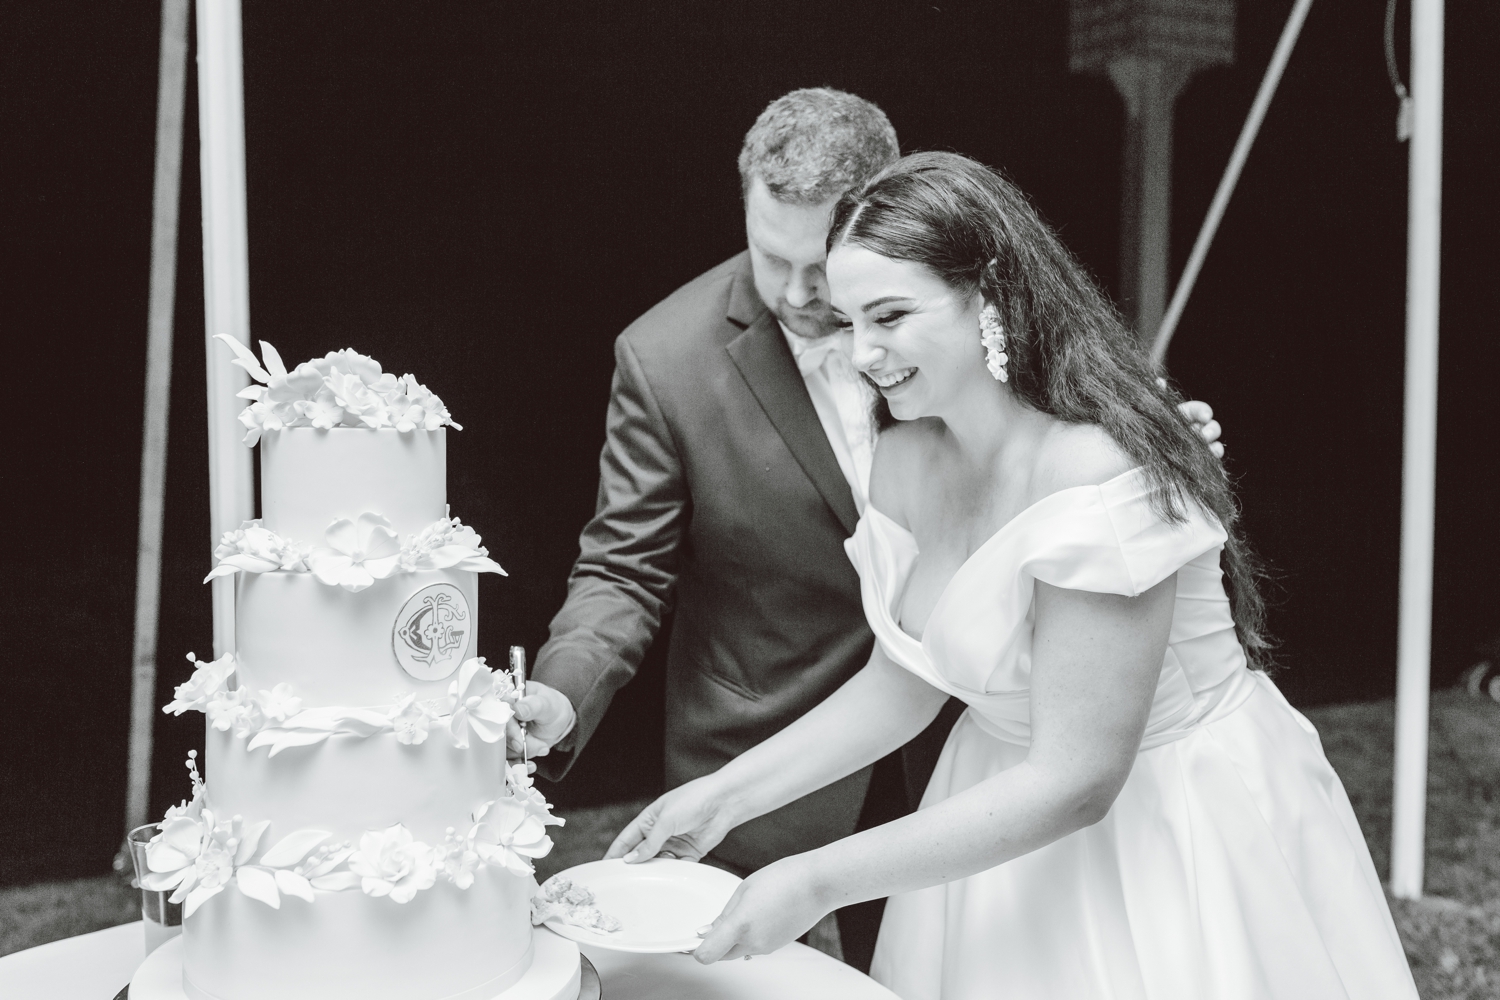 Bride and groom cutting cake at Ladew Topiary Garden wedding | Brooke Michelle Photo